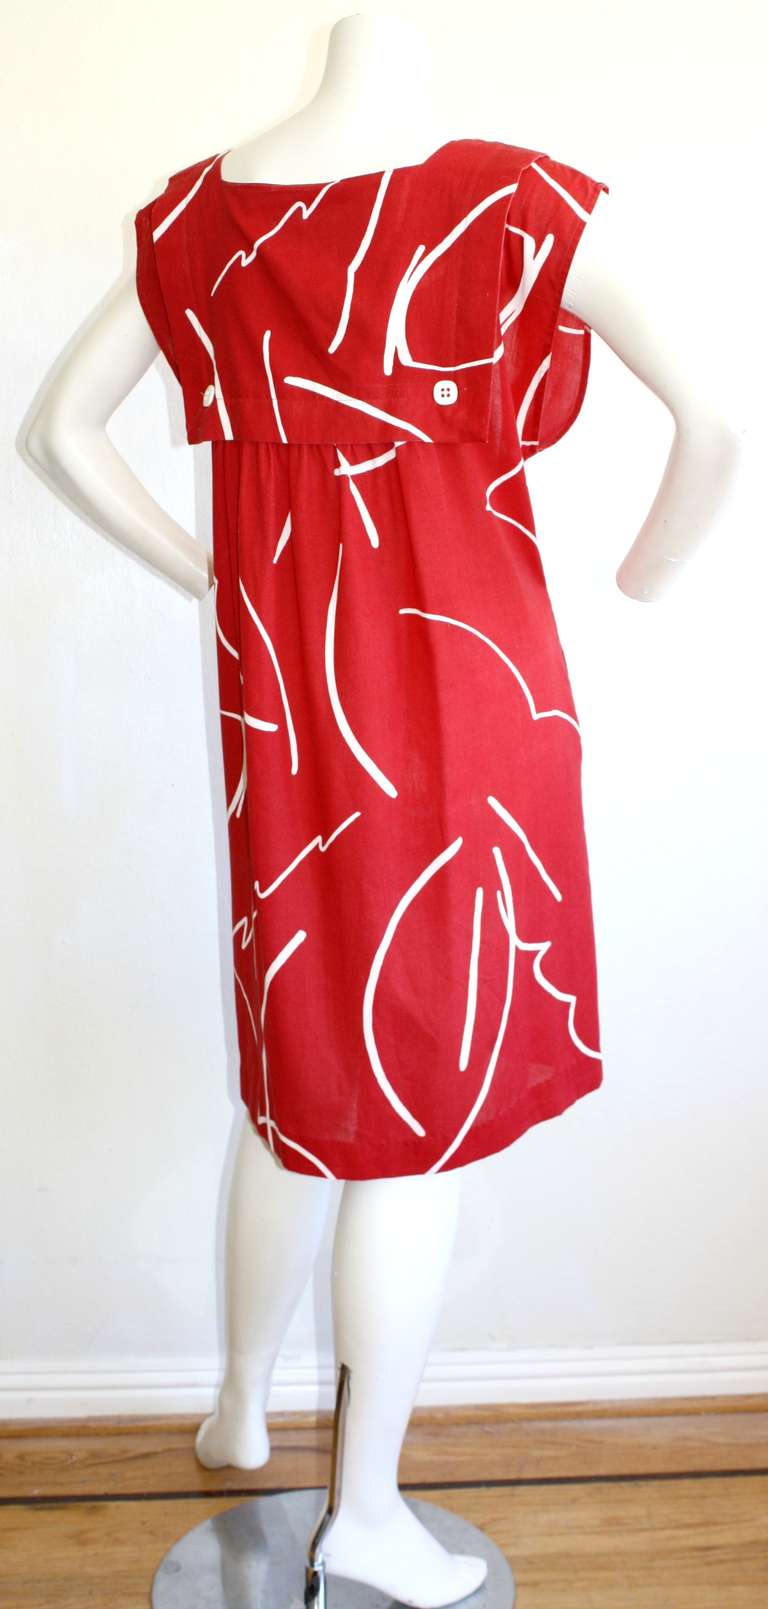 Bill Tice Hand Painted Vintage Red Cotton Graffiti Abstract Empire Dress For Sale 2